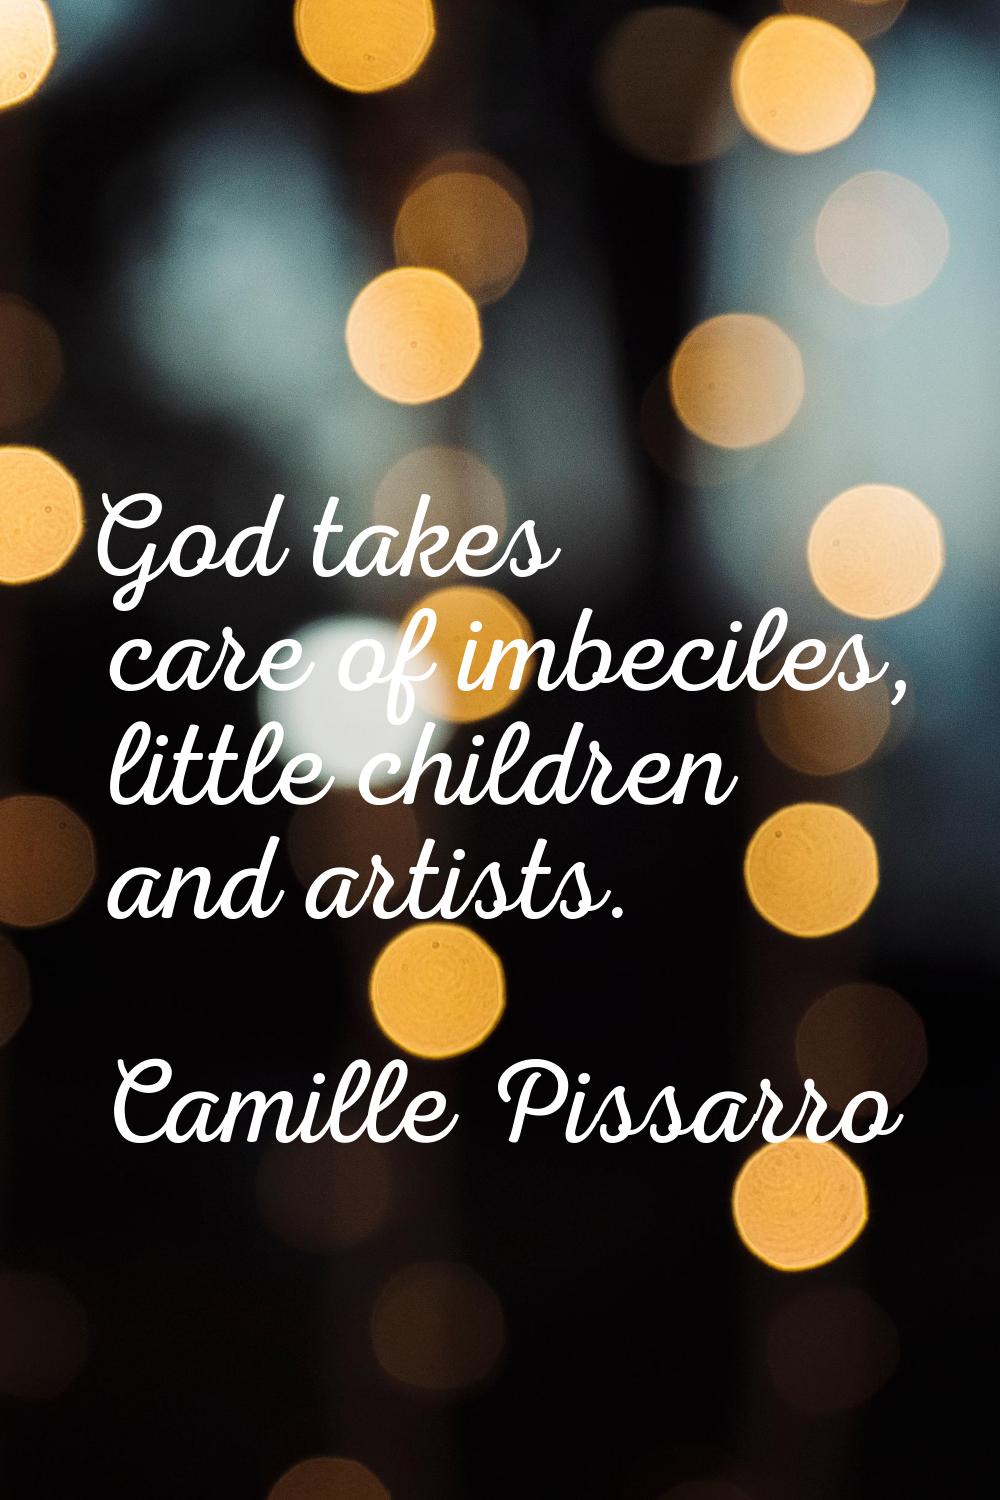 God takes care of imbeciles, little children and artists.